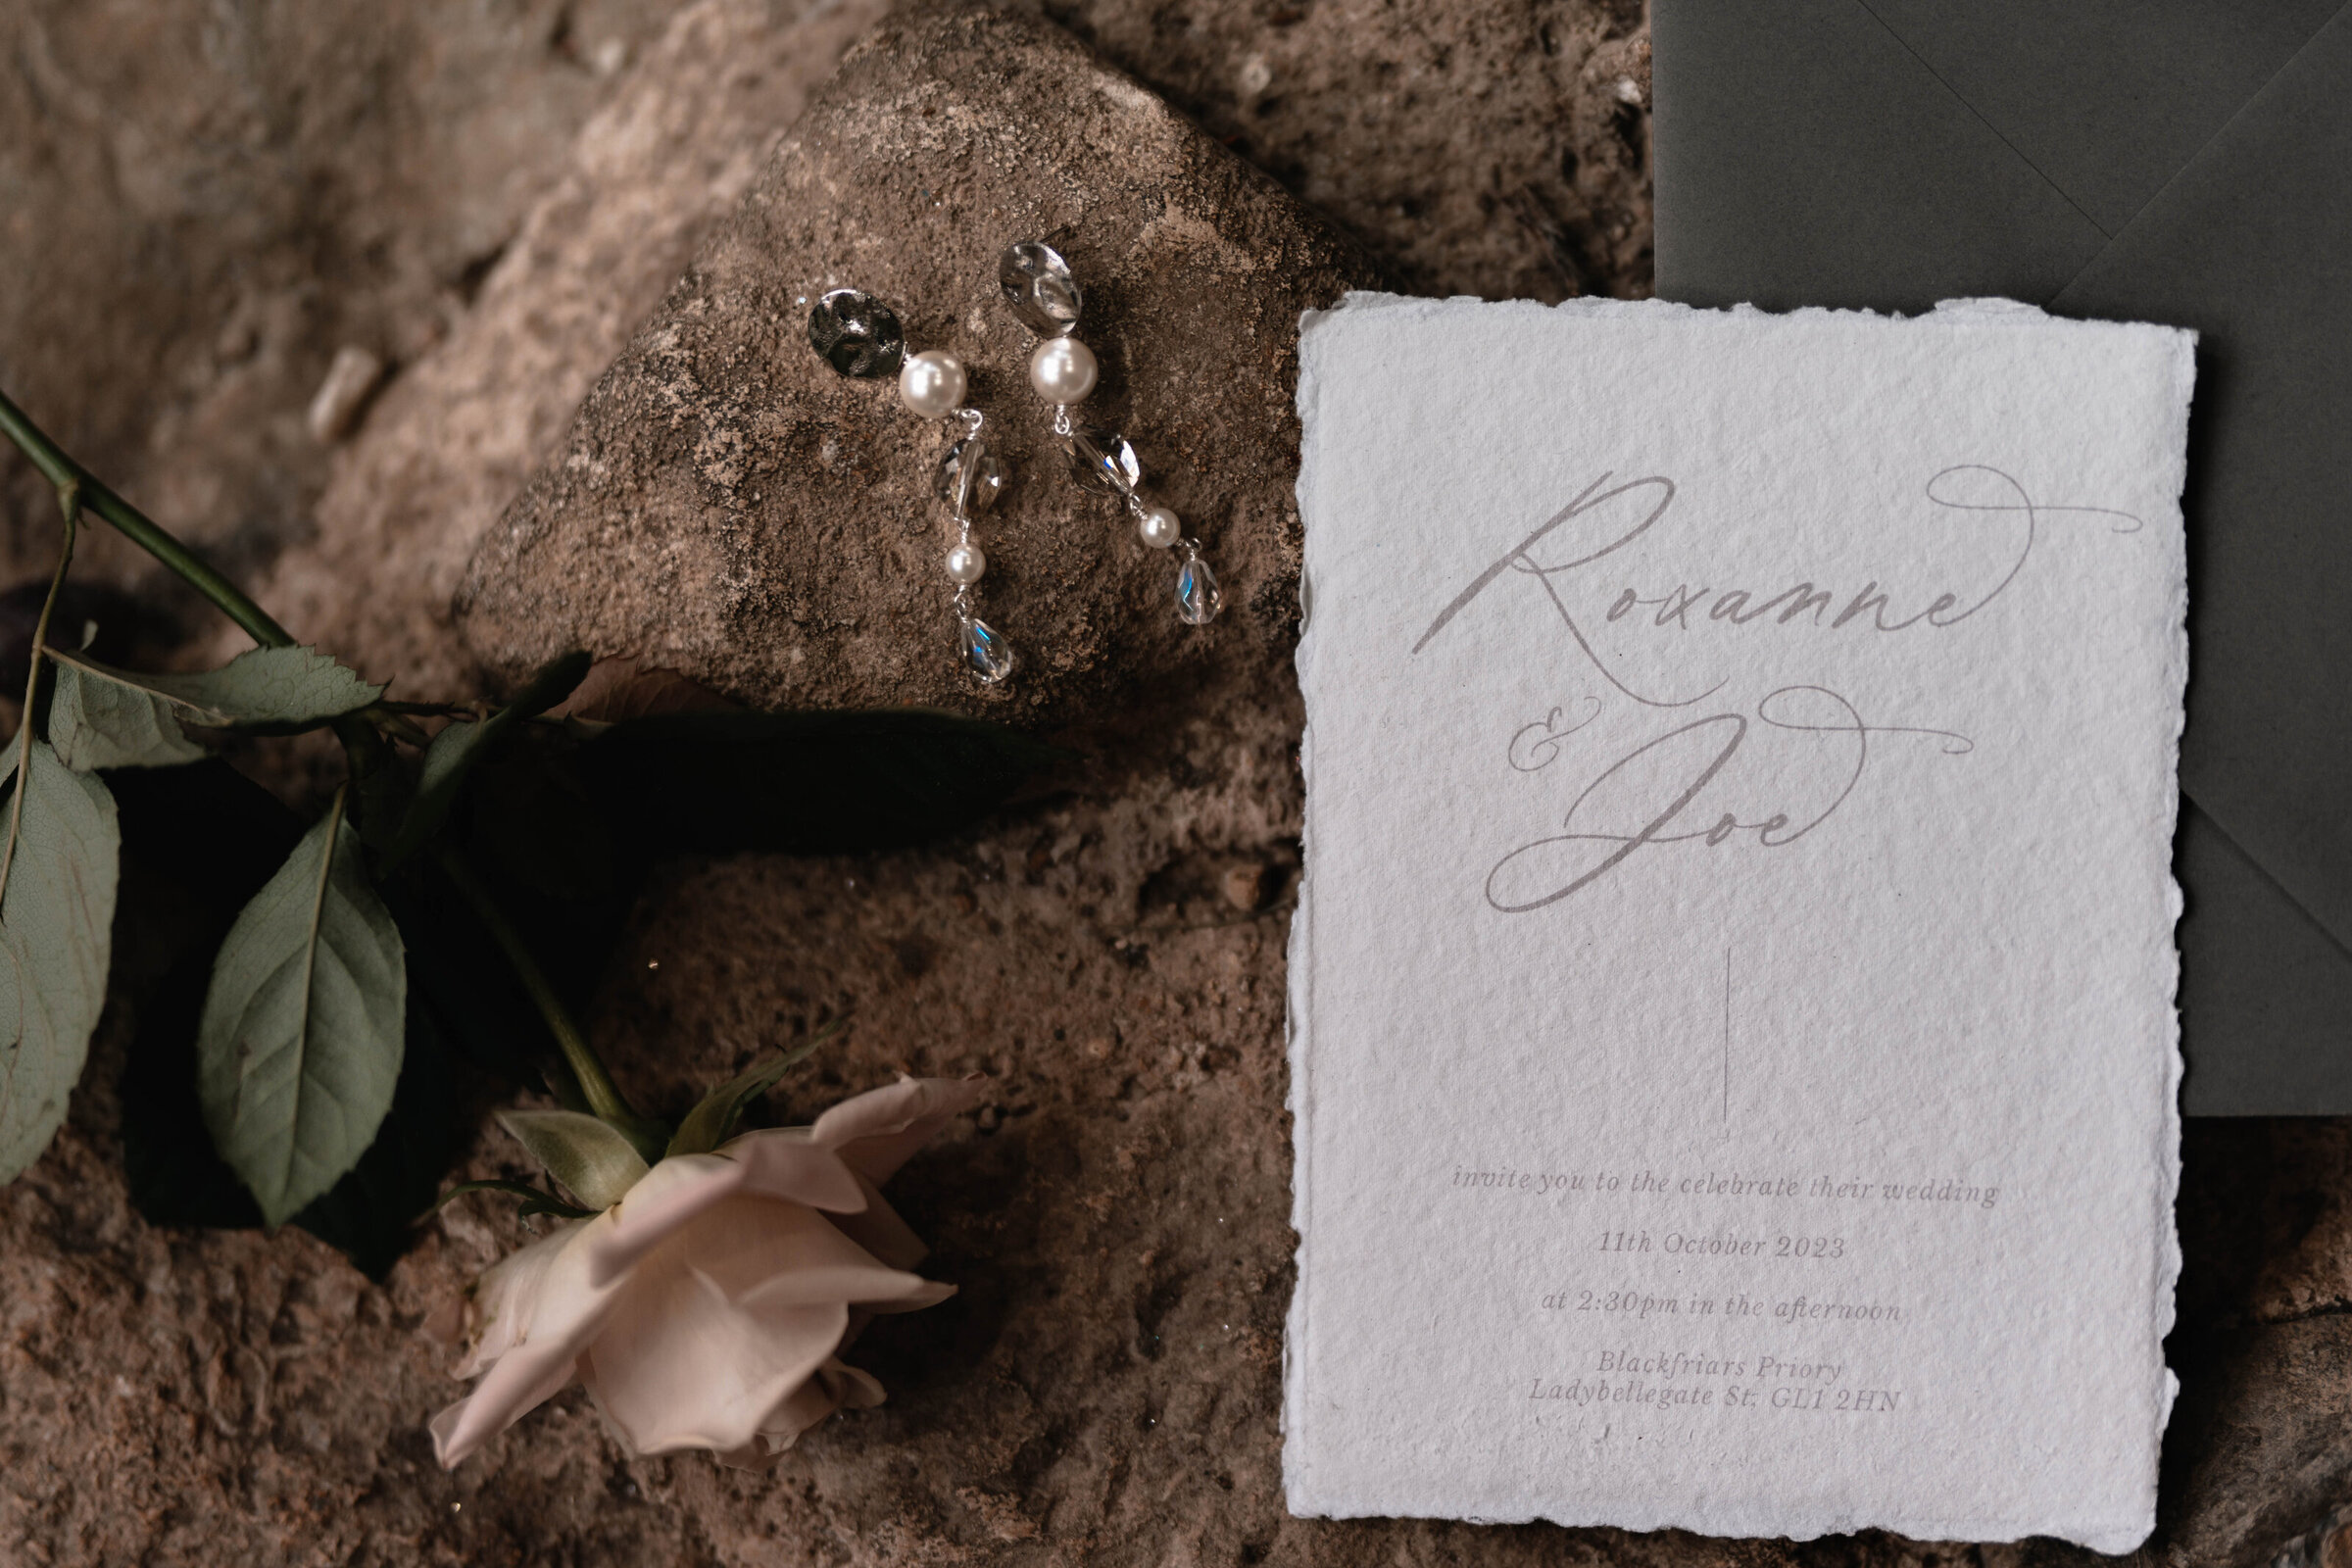 A wedding invitation, pear earrings and a single rose laid on top of a rocky surface